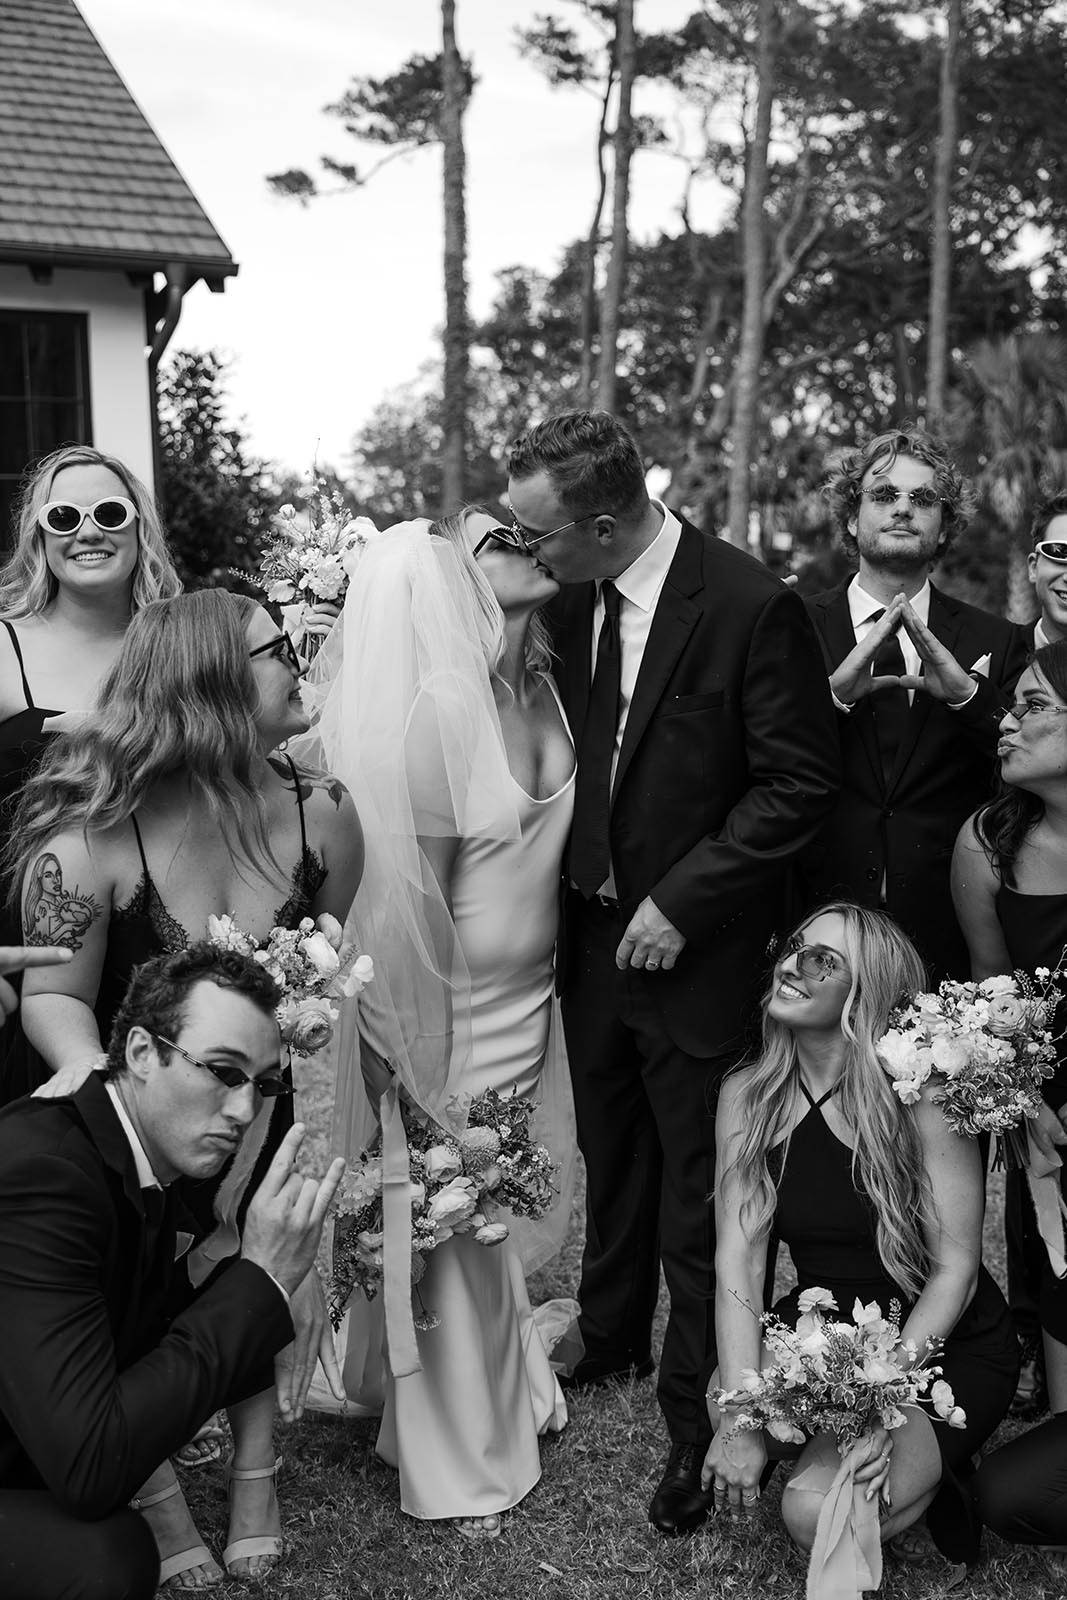 Classic black and white photograph capturing a heartwarming moment as the bride lovingly kisses the groom, while surrounded by joyful bridesmaids.